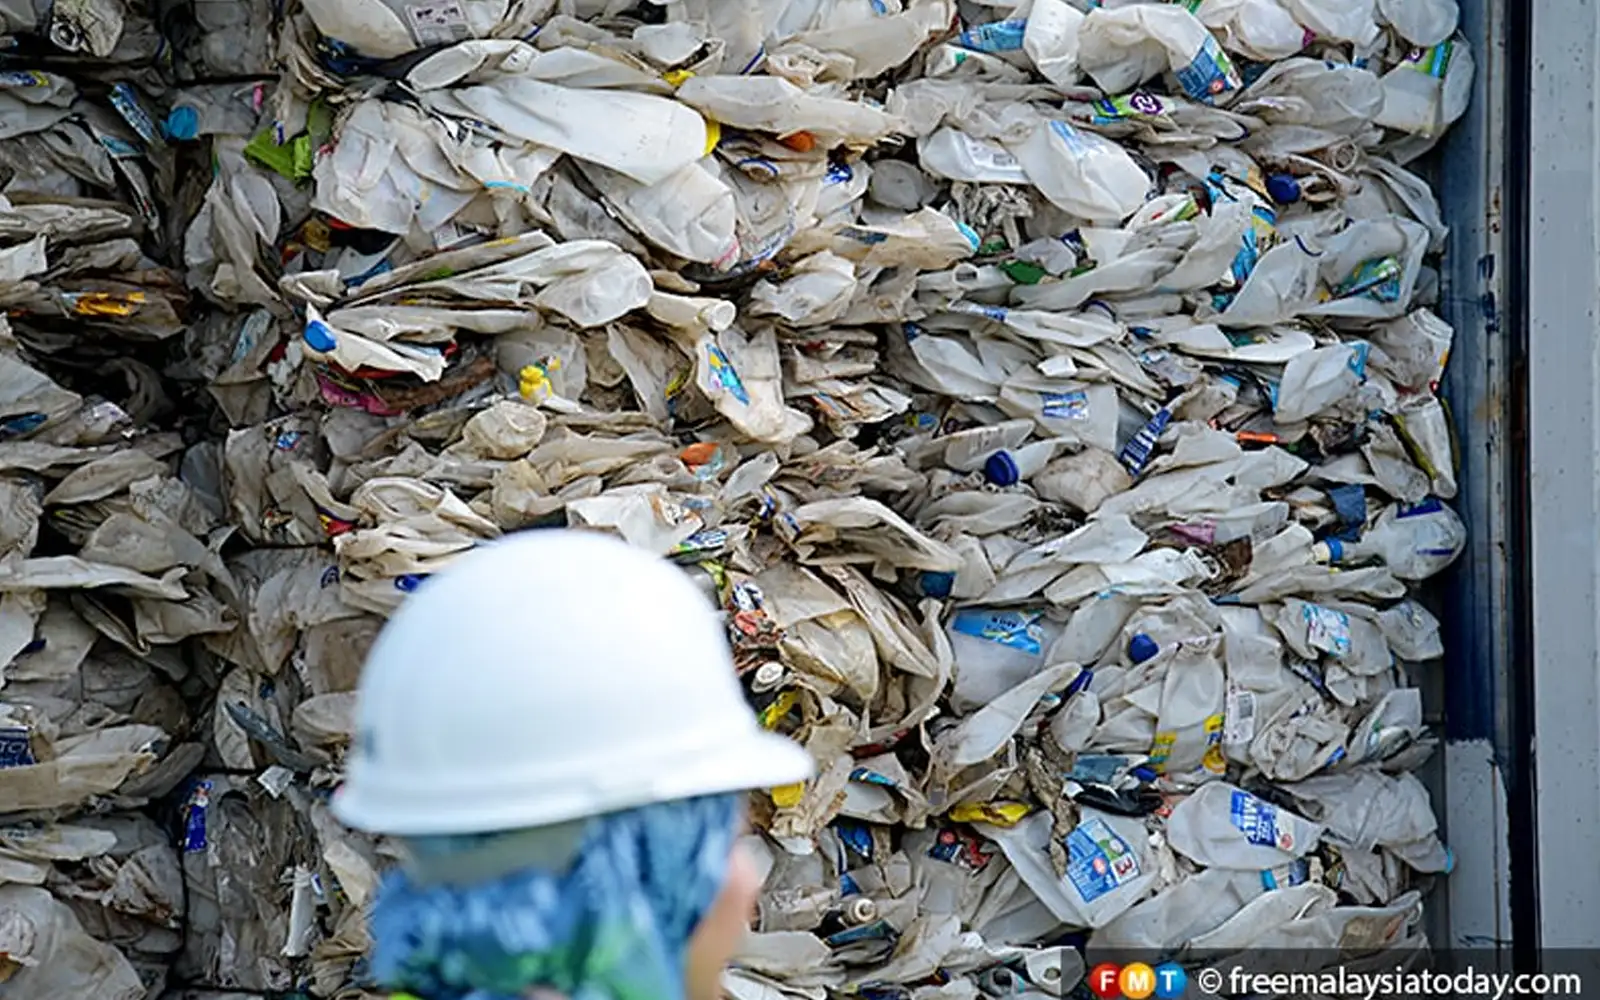 9,000 tonnes of plastic waste from Japan underreported, says activist